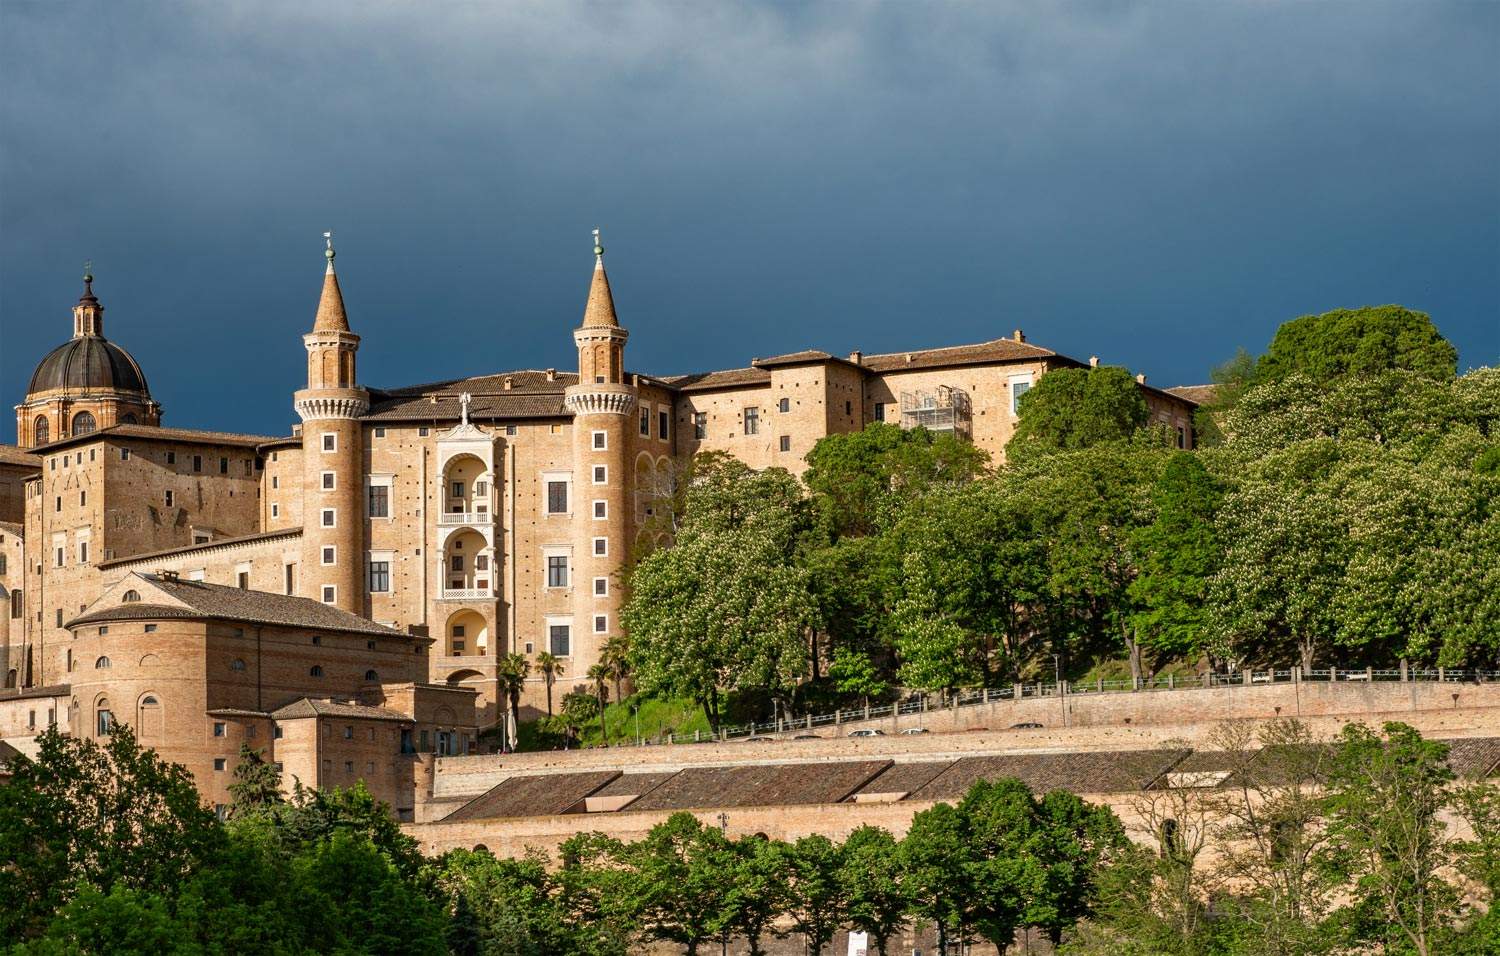 Urbino, at the Galleria Nazionale delle Marche an exhibition dedicated to the Ducal Palace